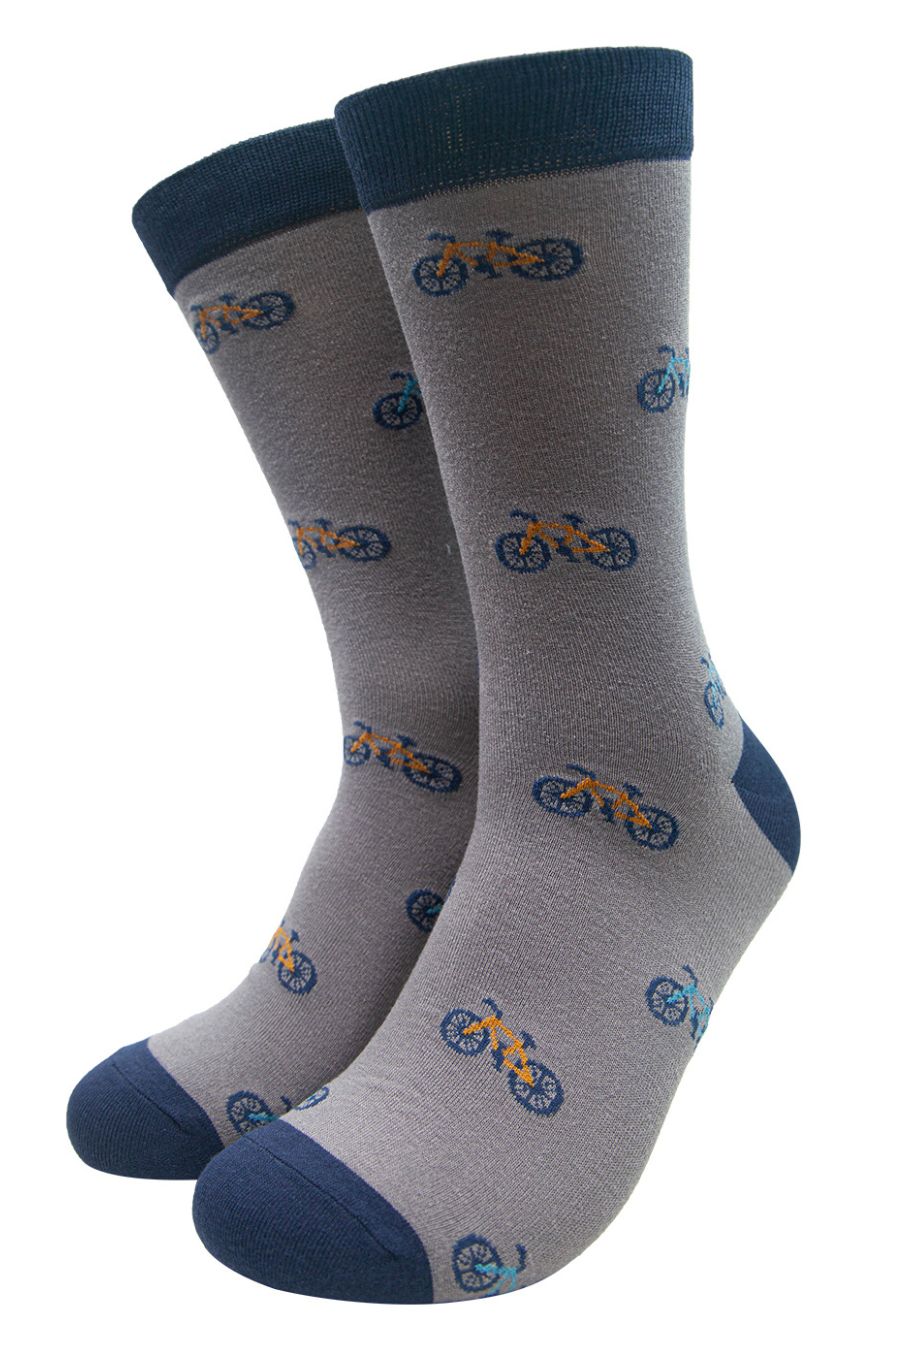 grey bamboo socks with blue mountain bikes all over